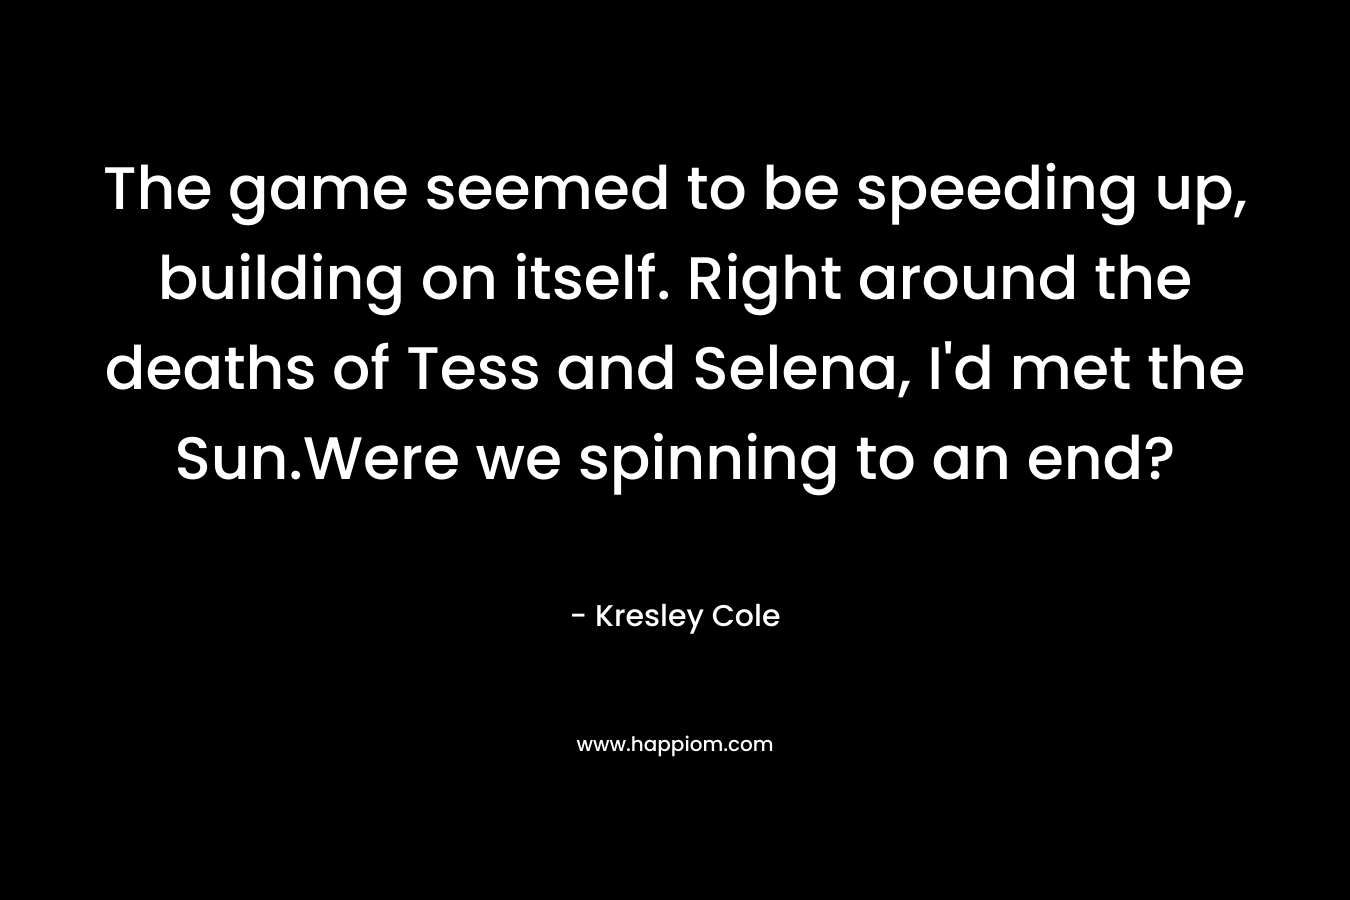 The game seemed to be speeding up, building on itself. Right around the deaths of Tess and Selena, I’d met the Sun.Were we spinning to an end? – Kresley Cole